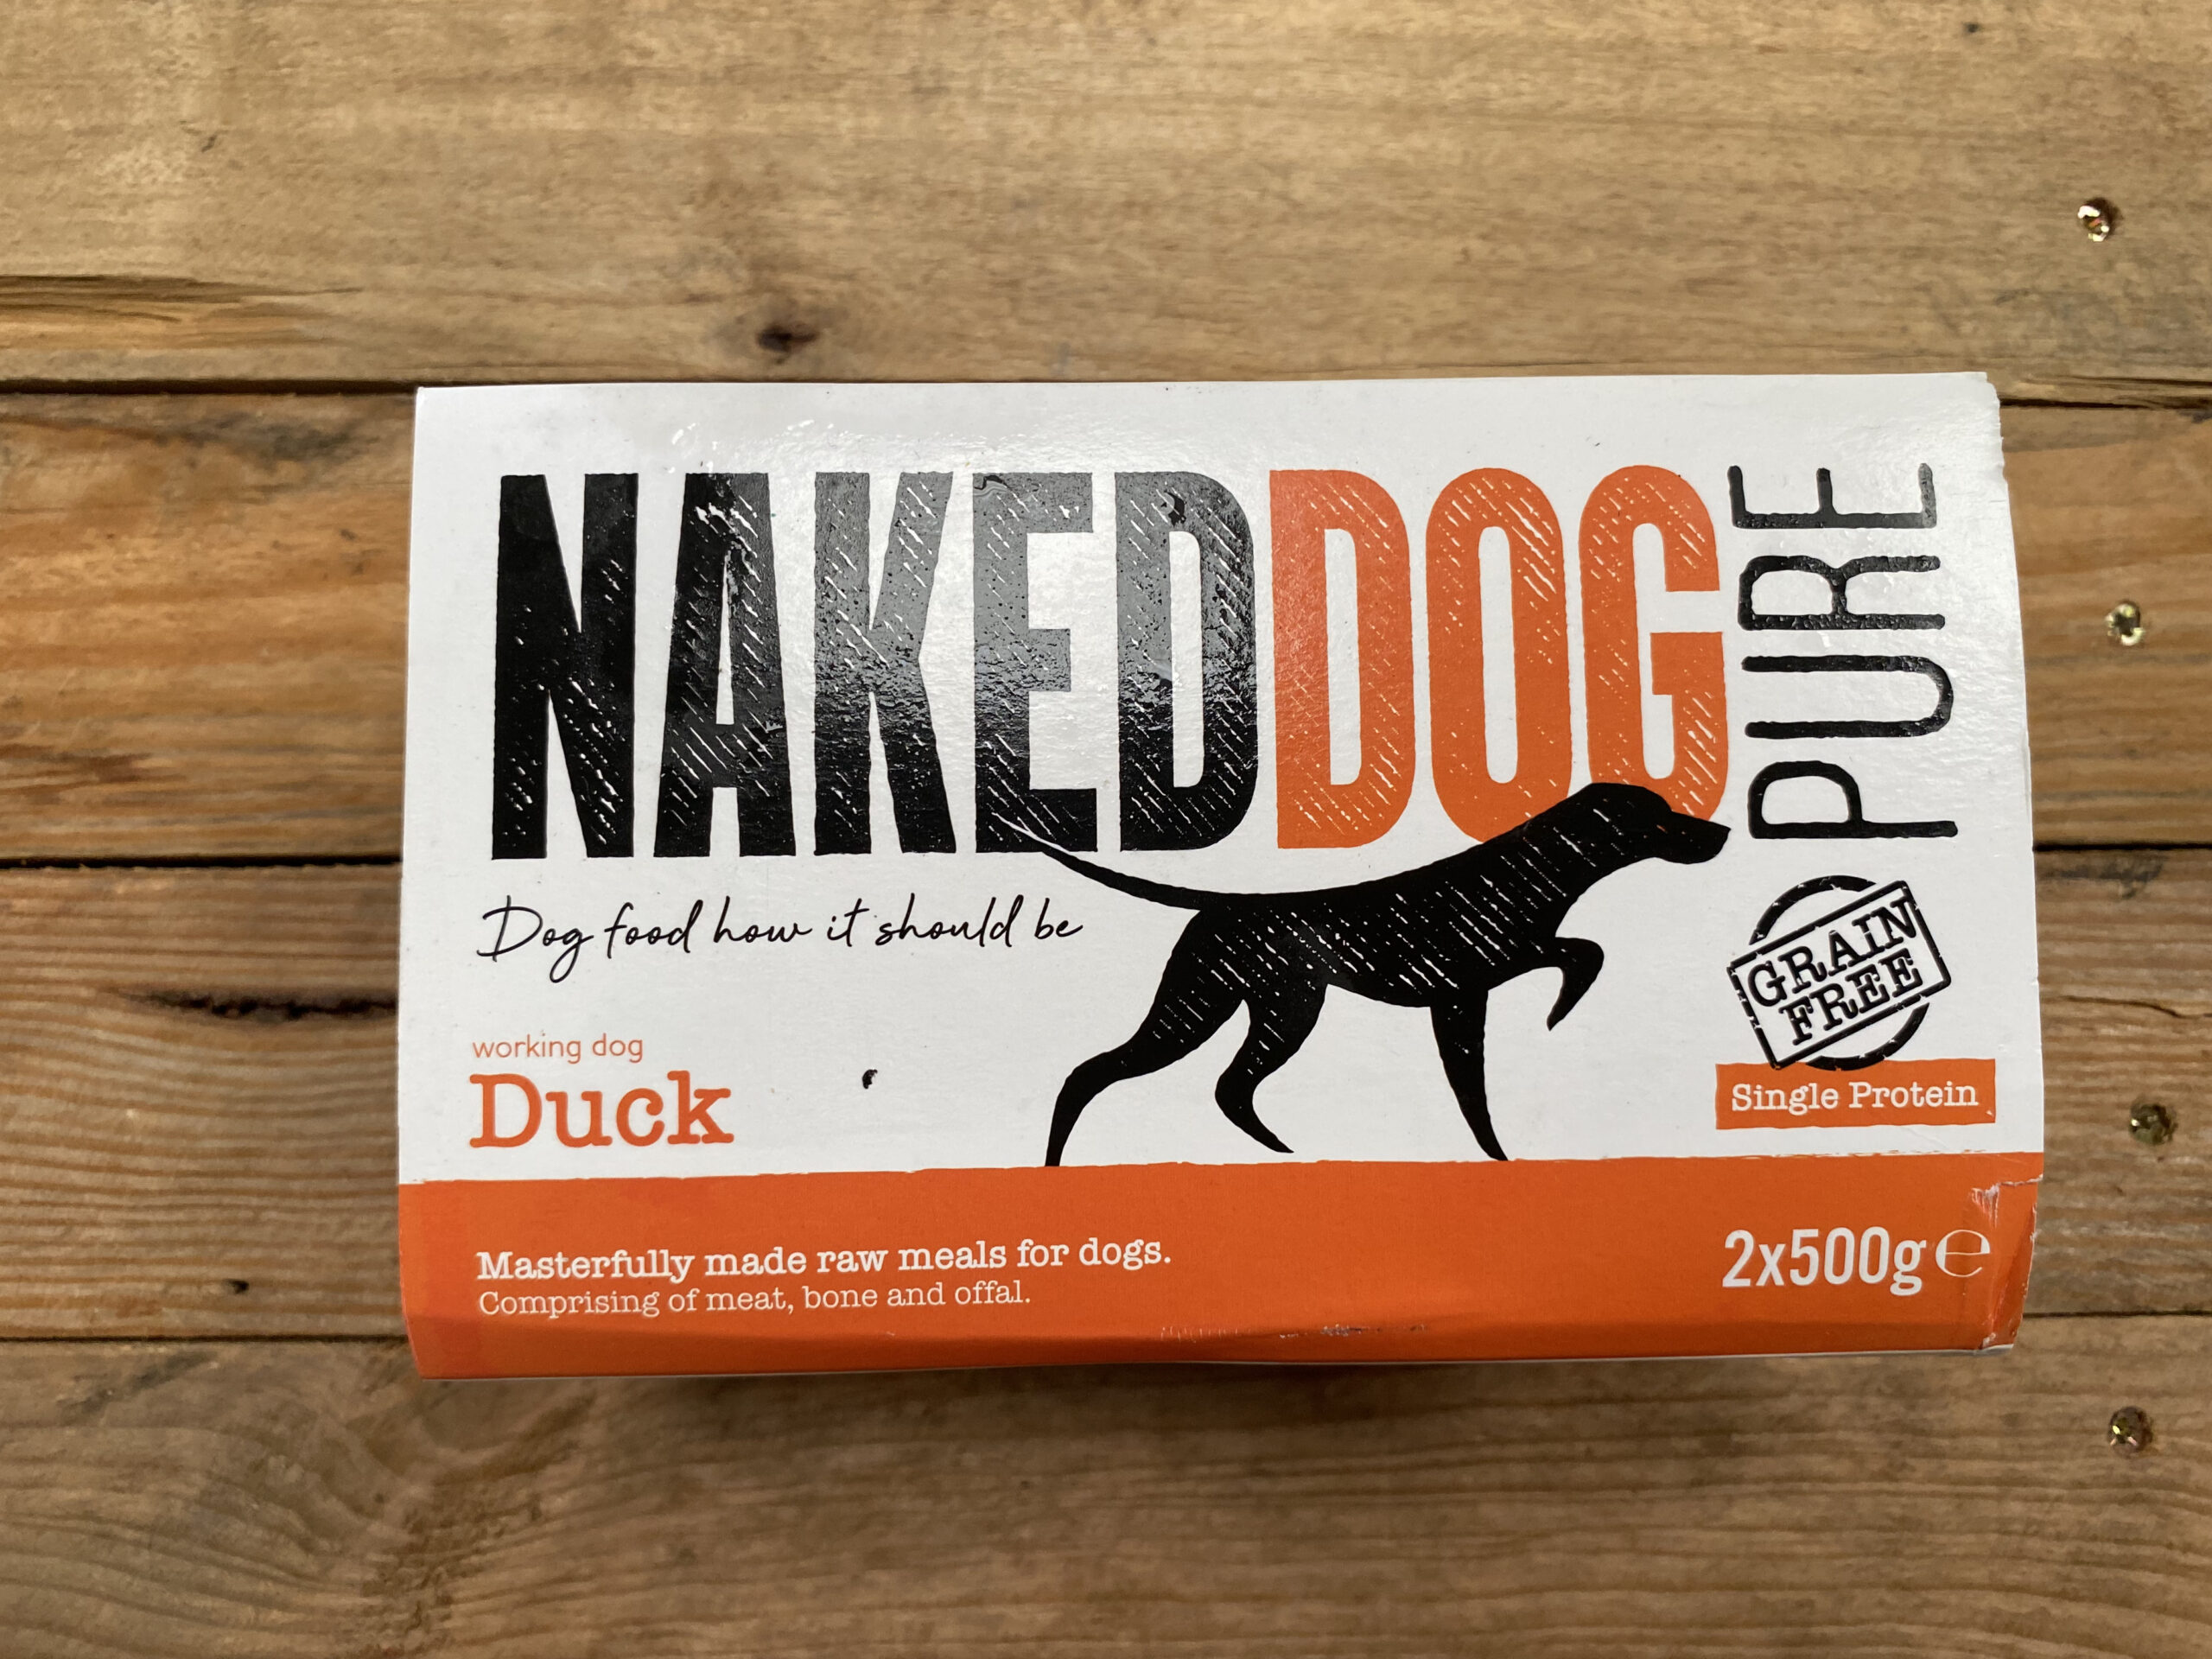 Naked Dog Pure Duck – 2x500g